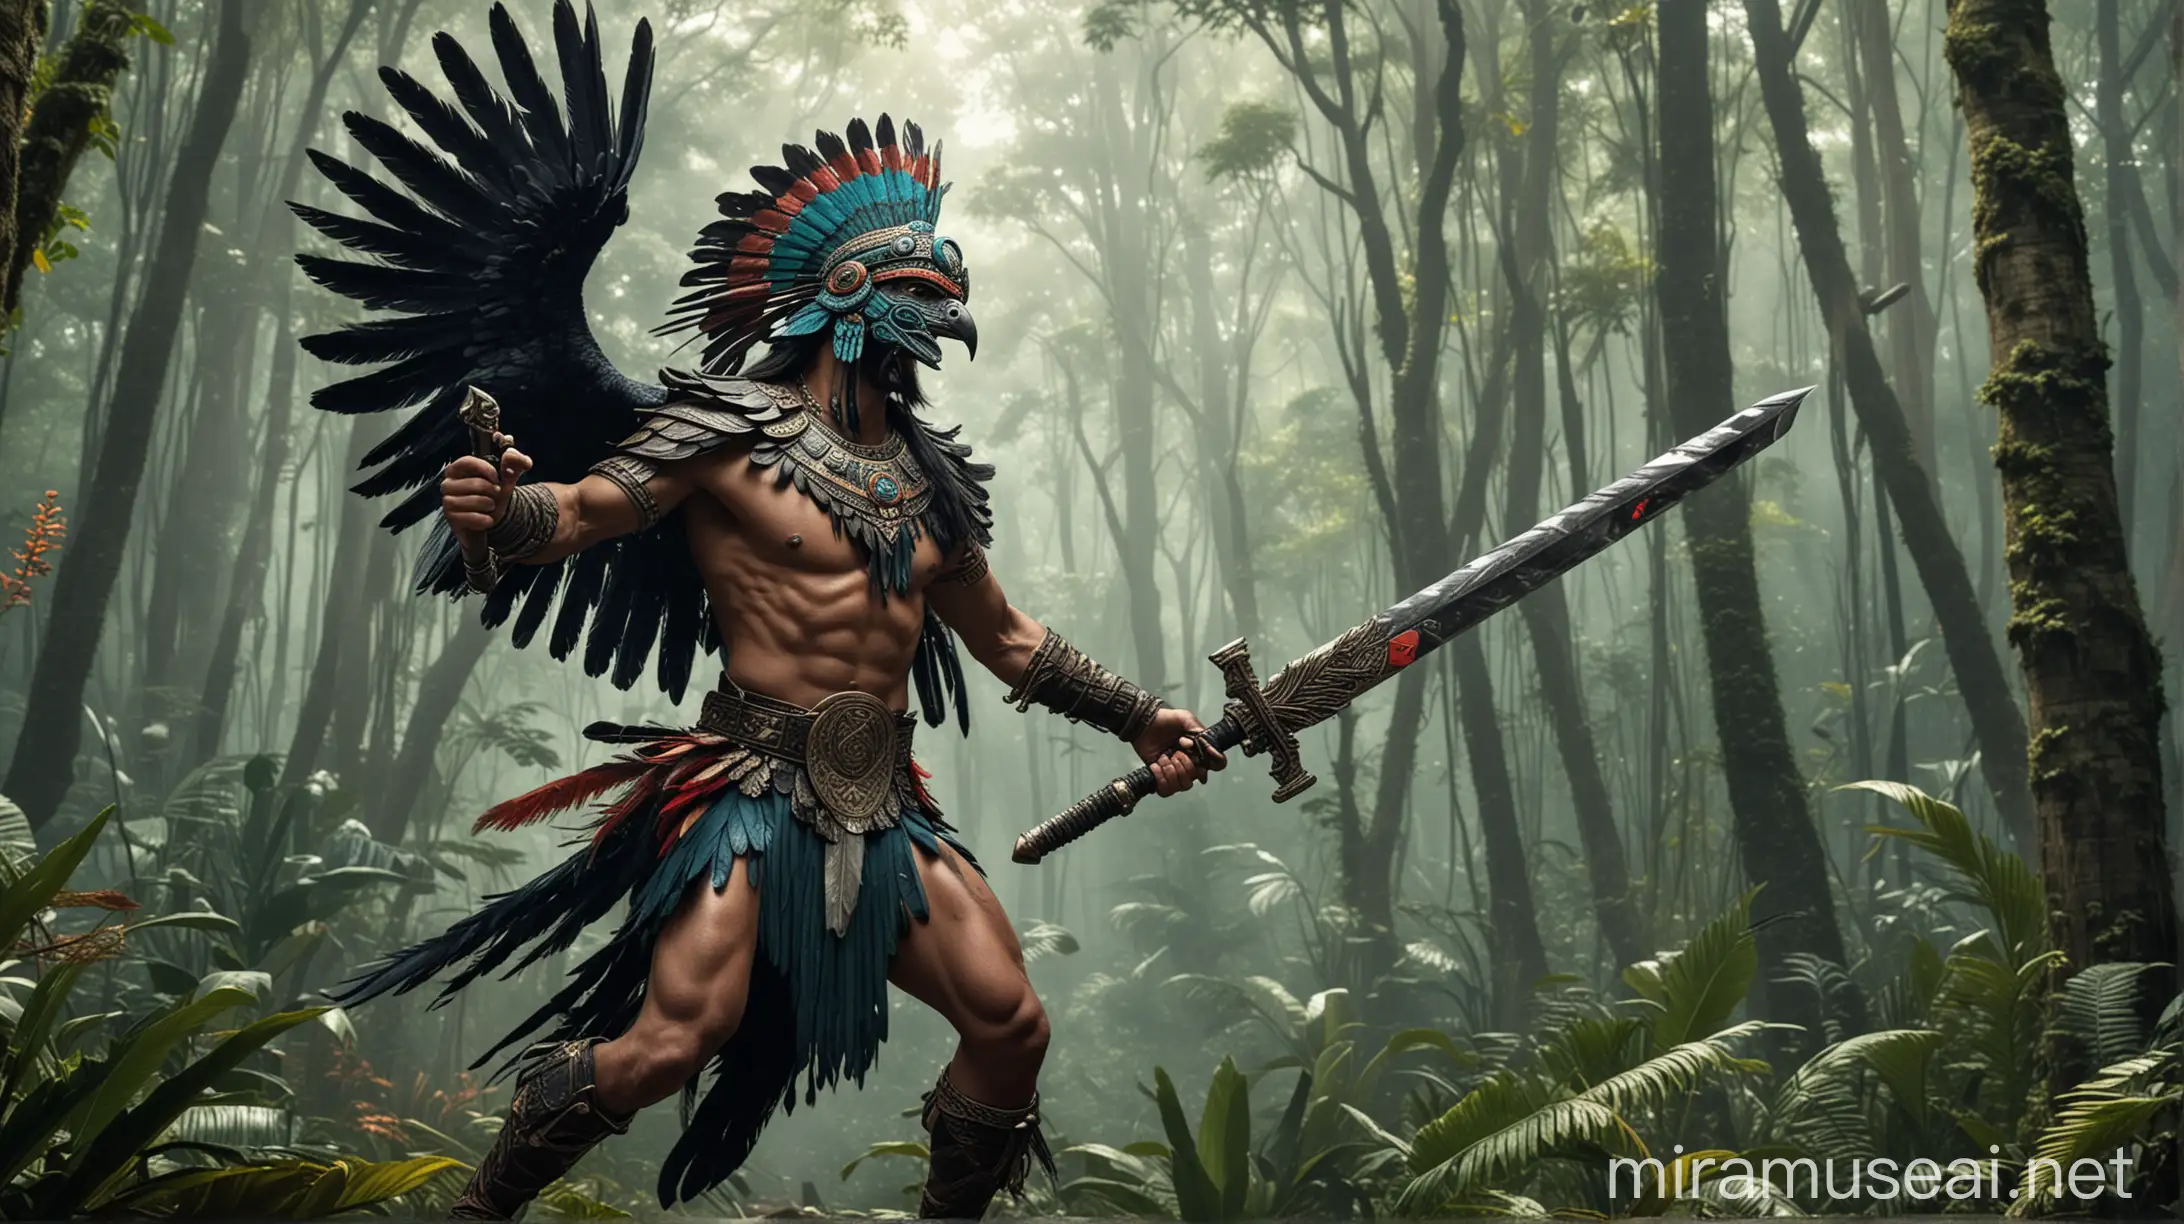 Aztec Warrior with Obsidian Sword and Flying Quetzal in Jungle